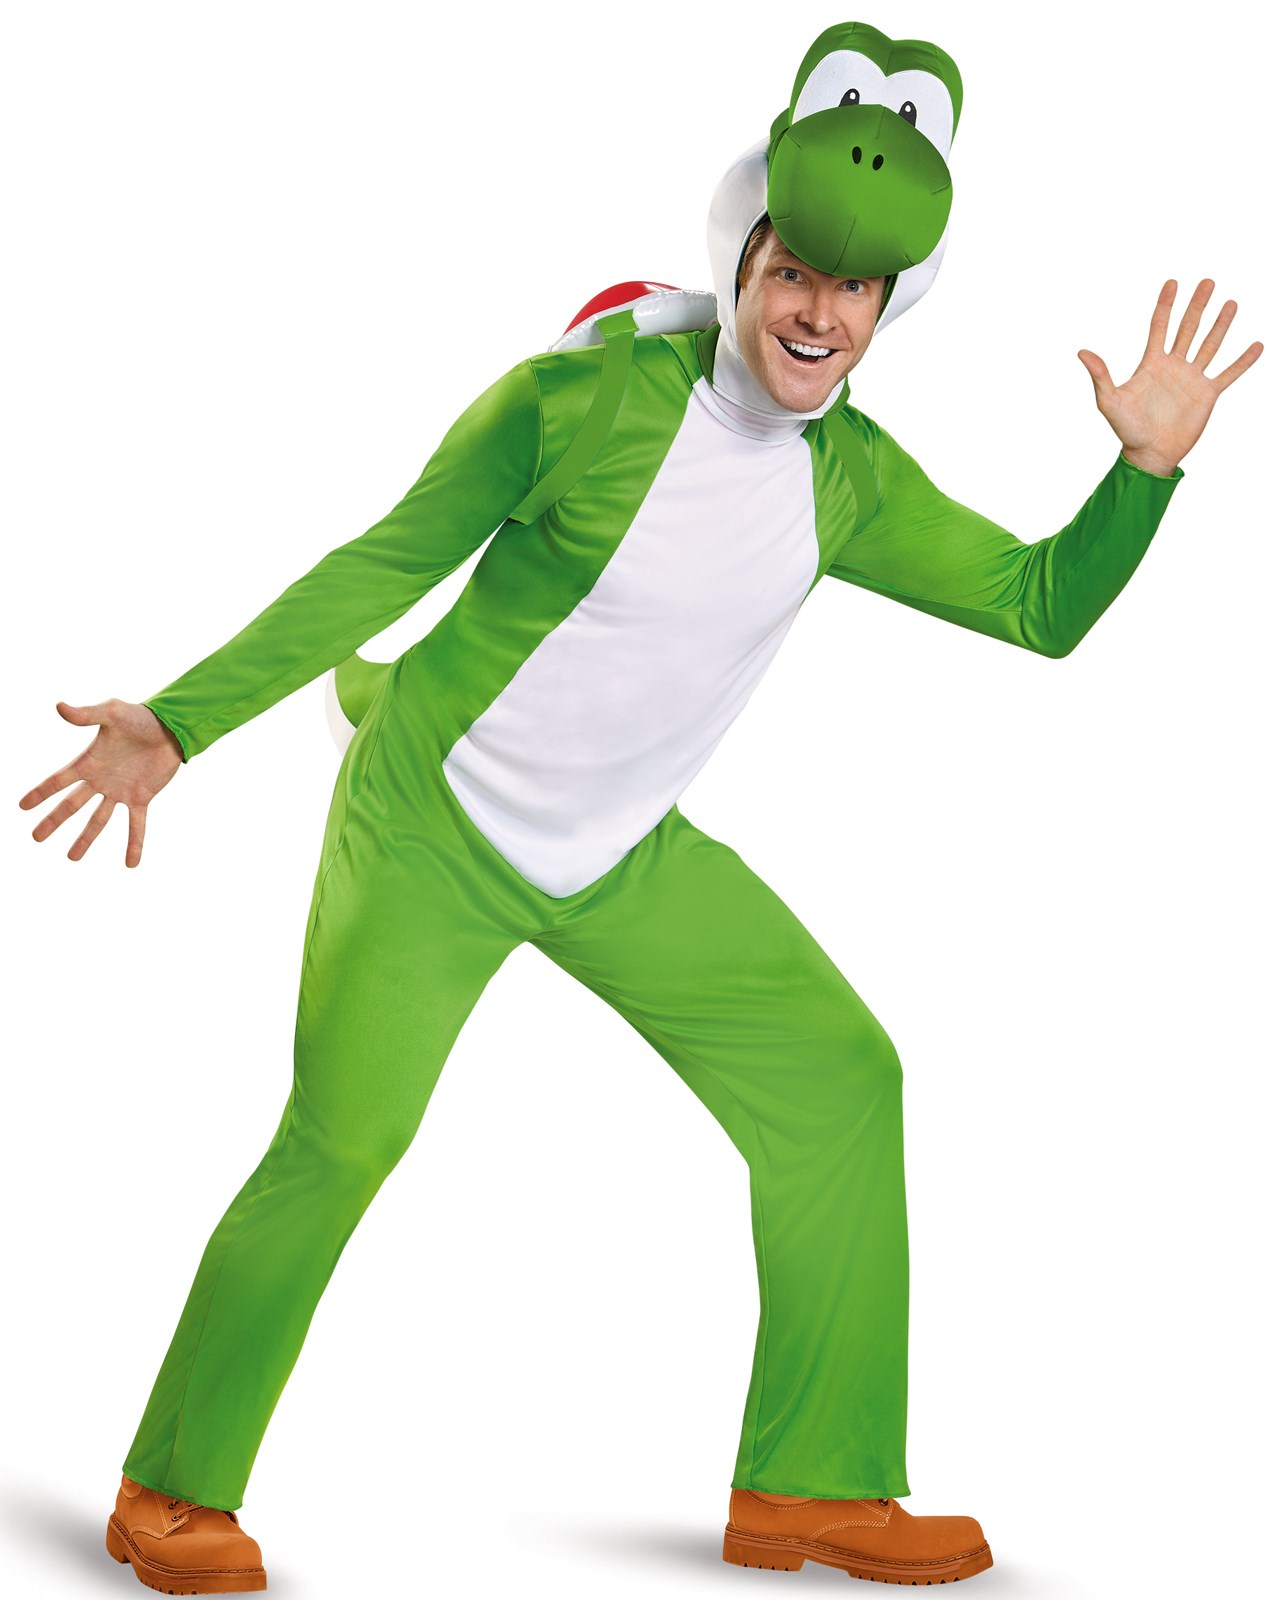 Super Mario: Deluxe Yoshi Costume For Adults